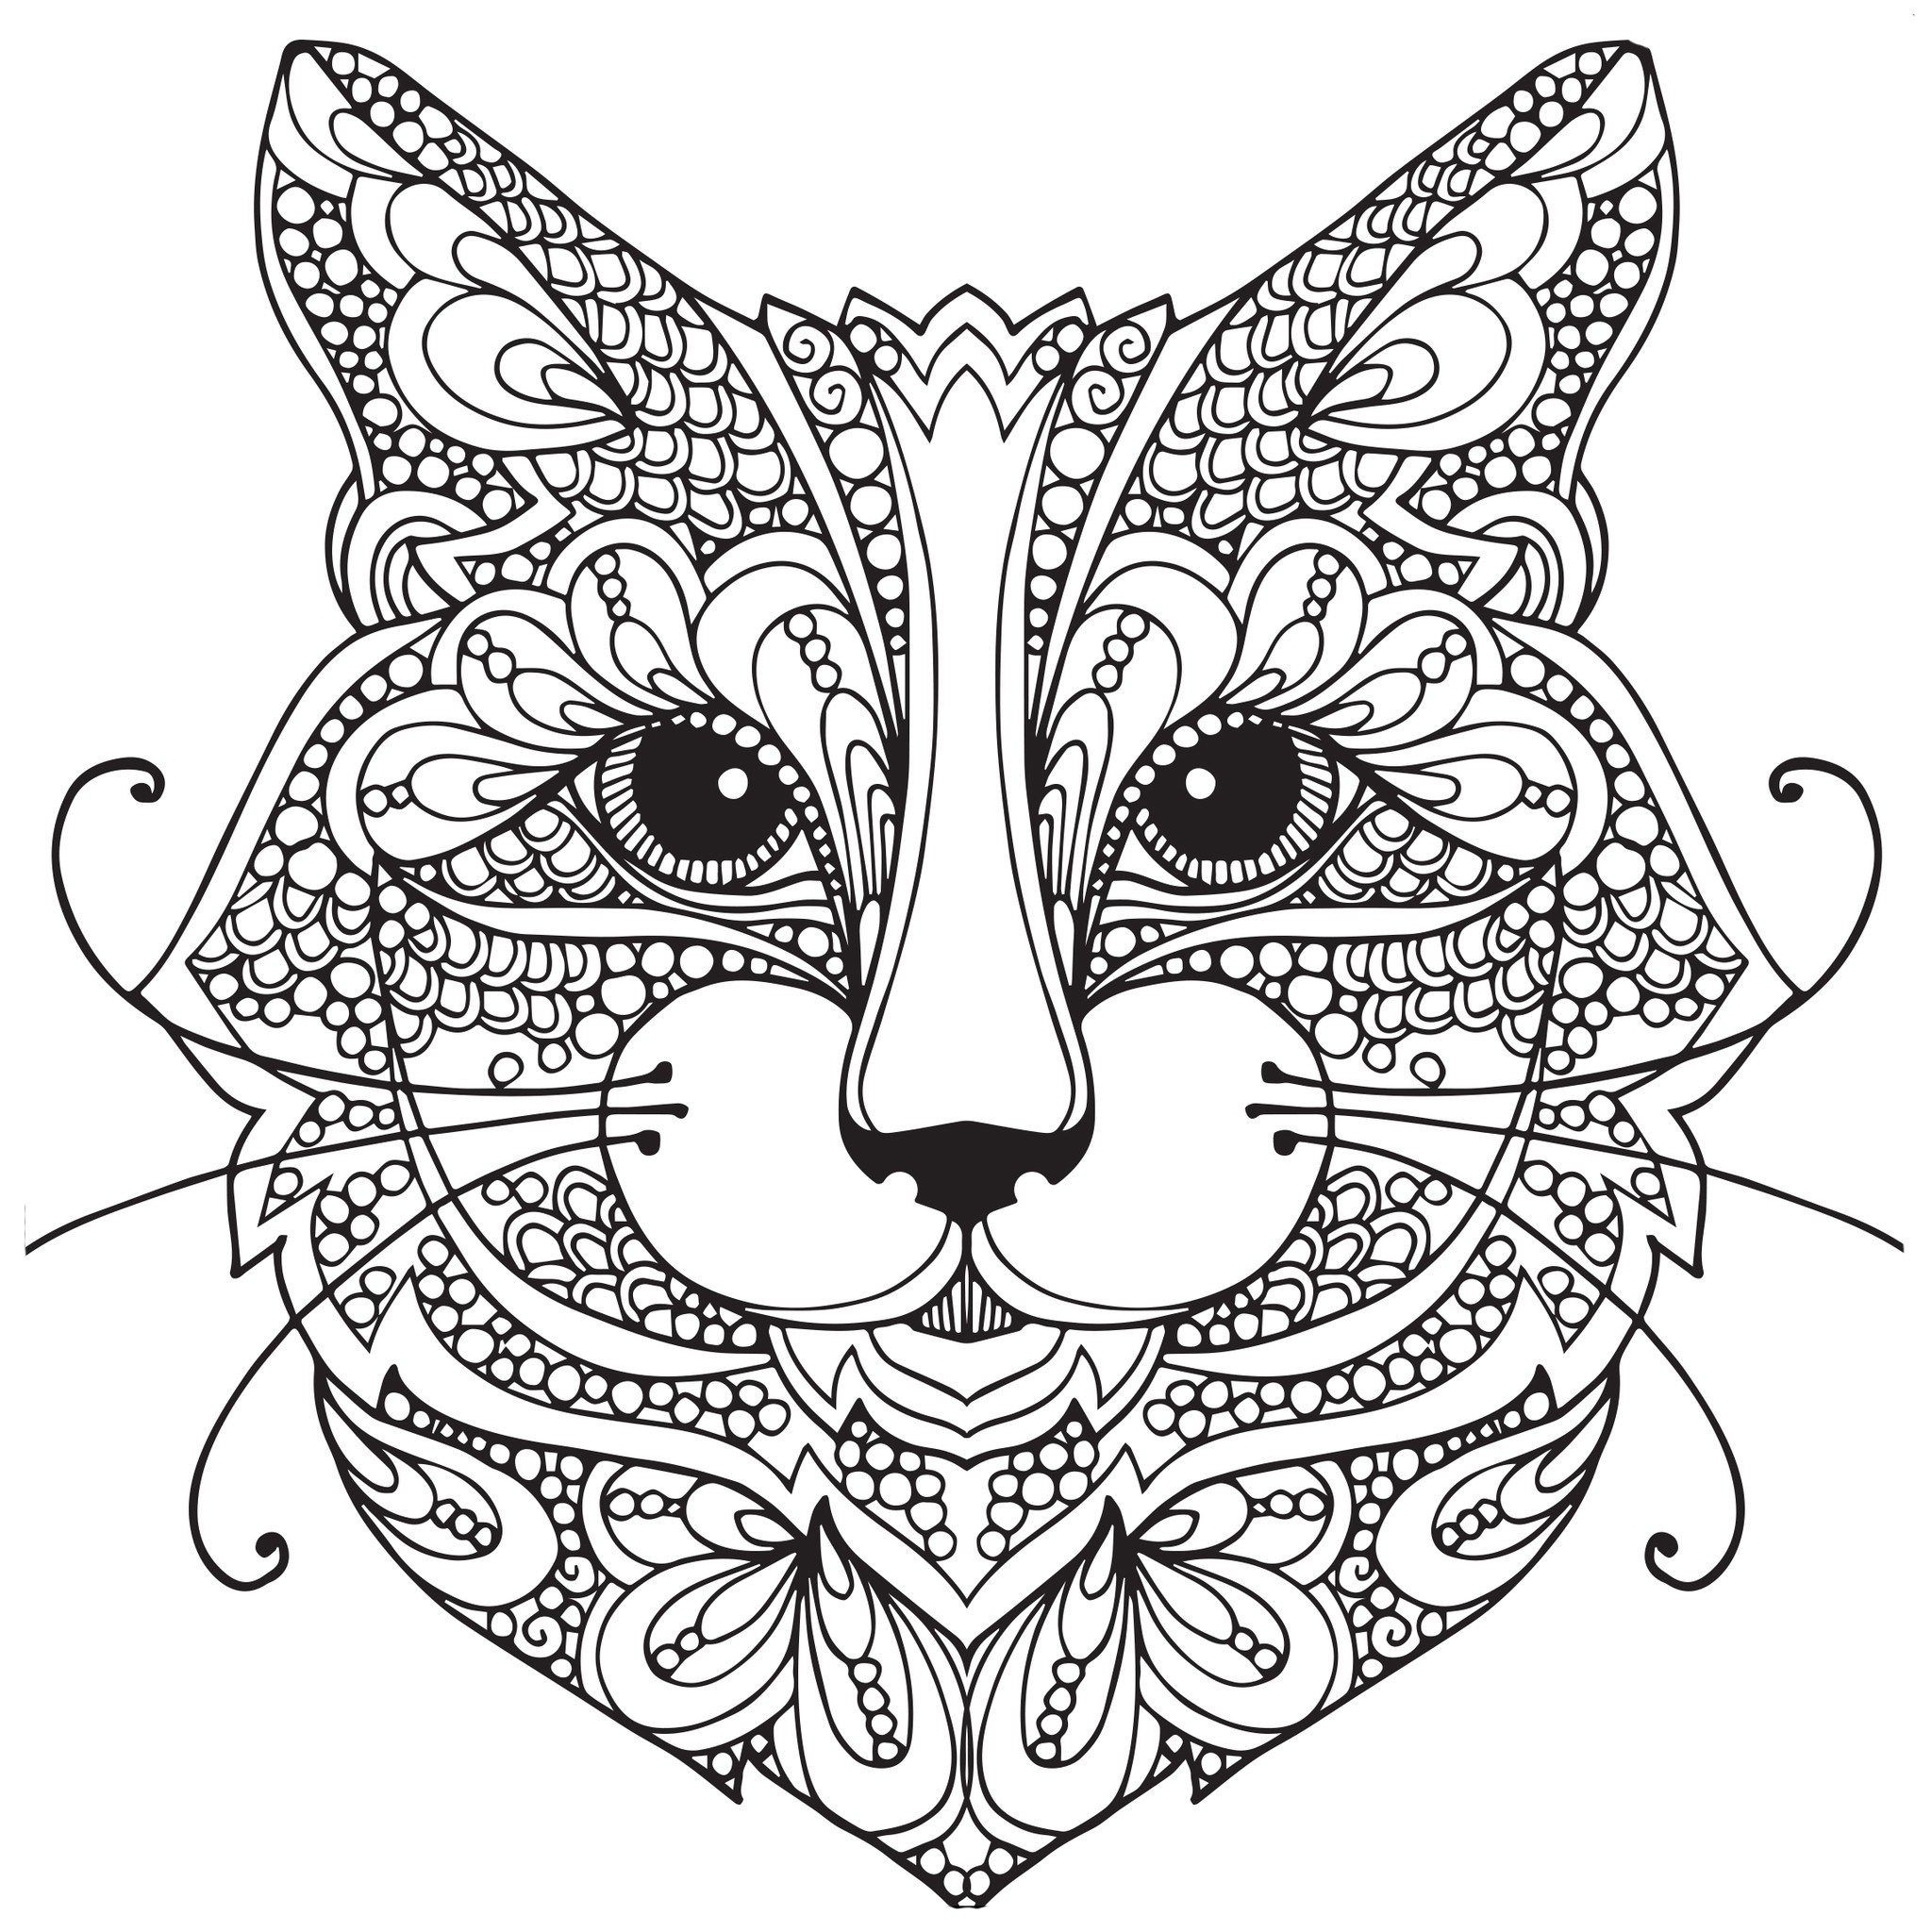 Cats Adult Coloring Book
 Adult Coloring Pages Cat 1 coloring pages